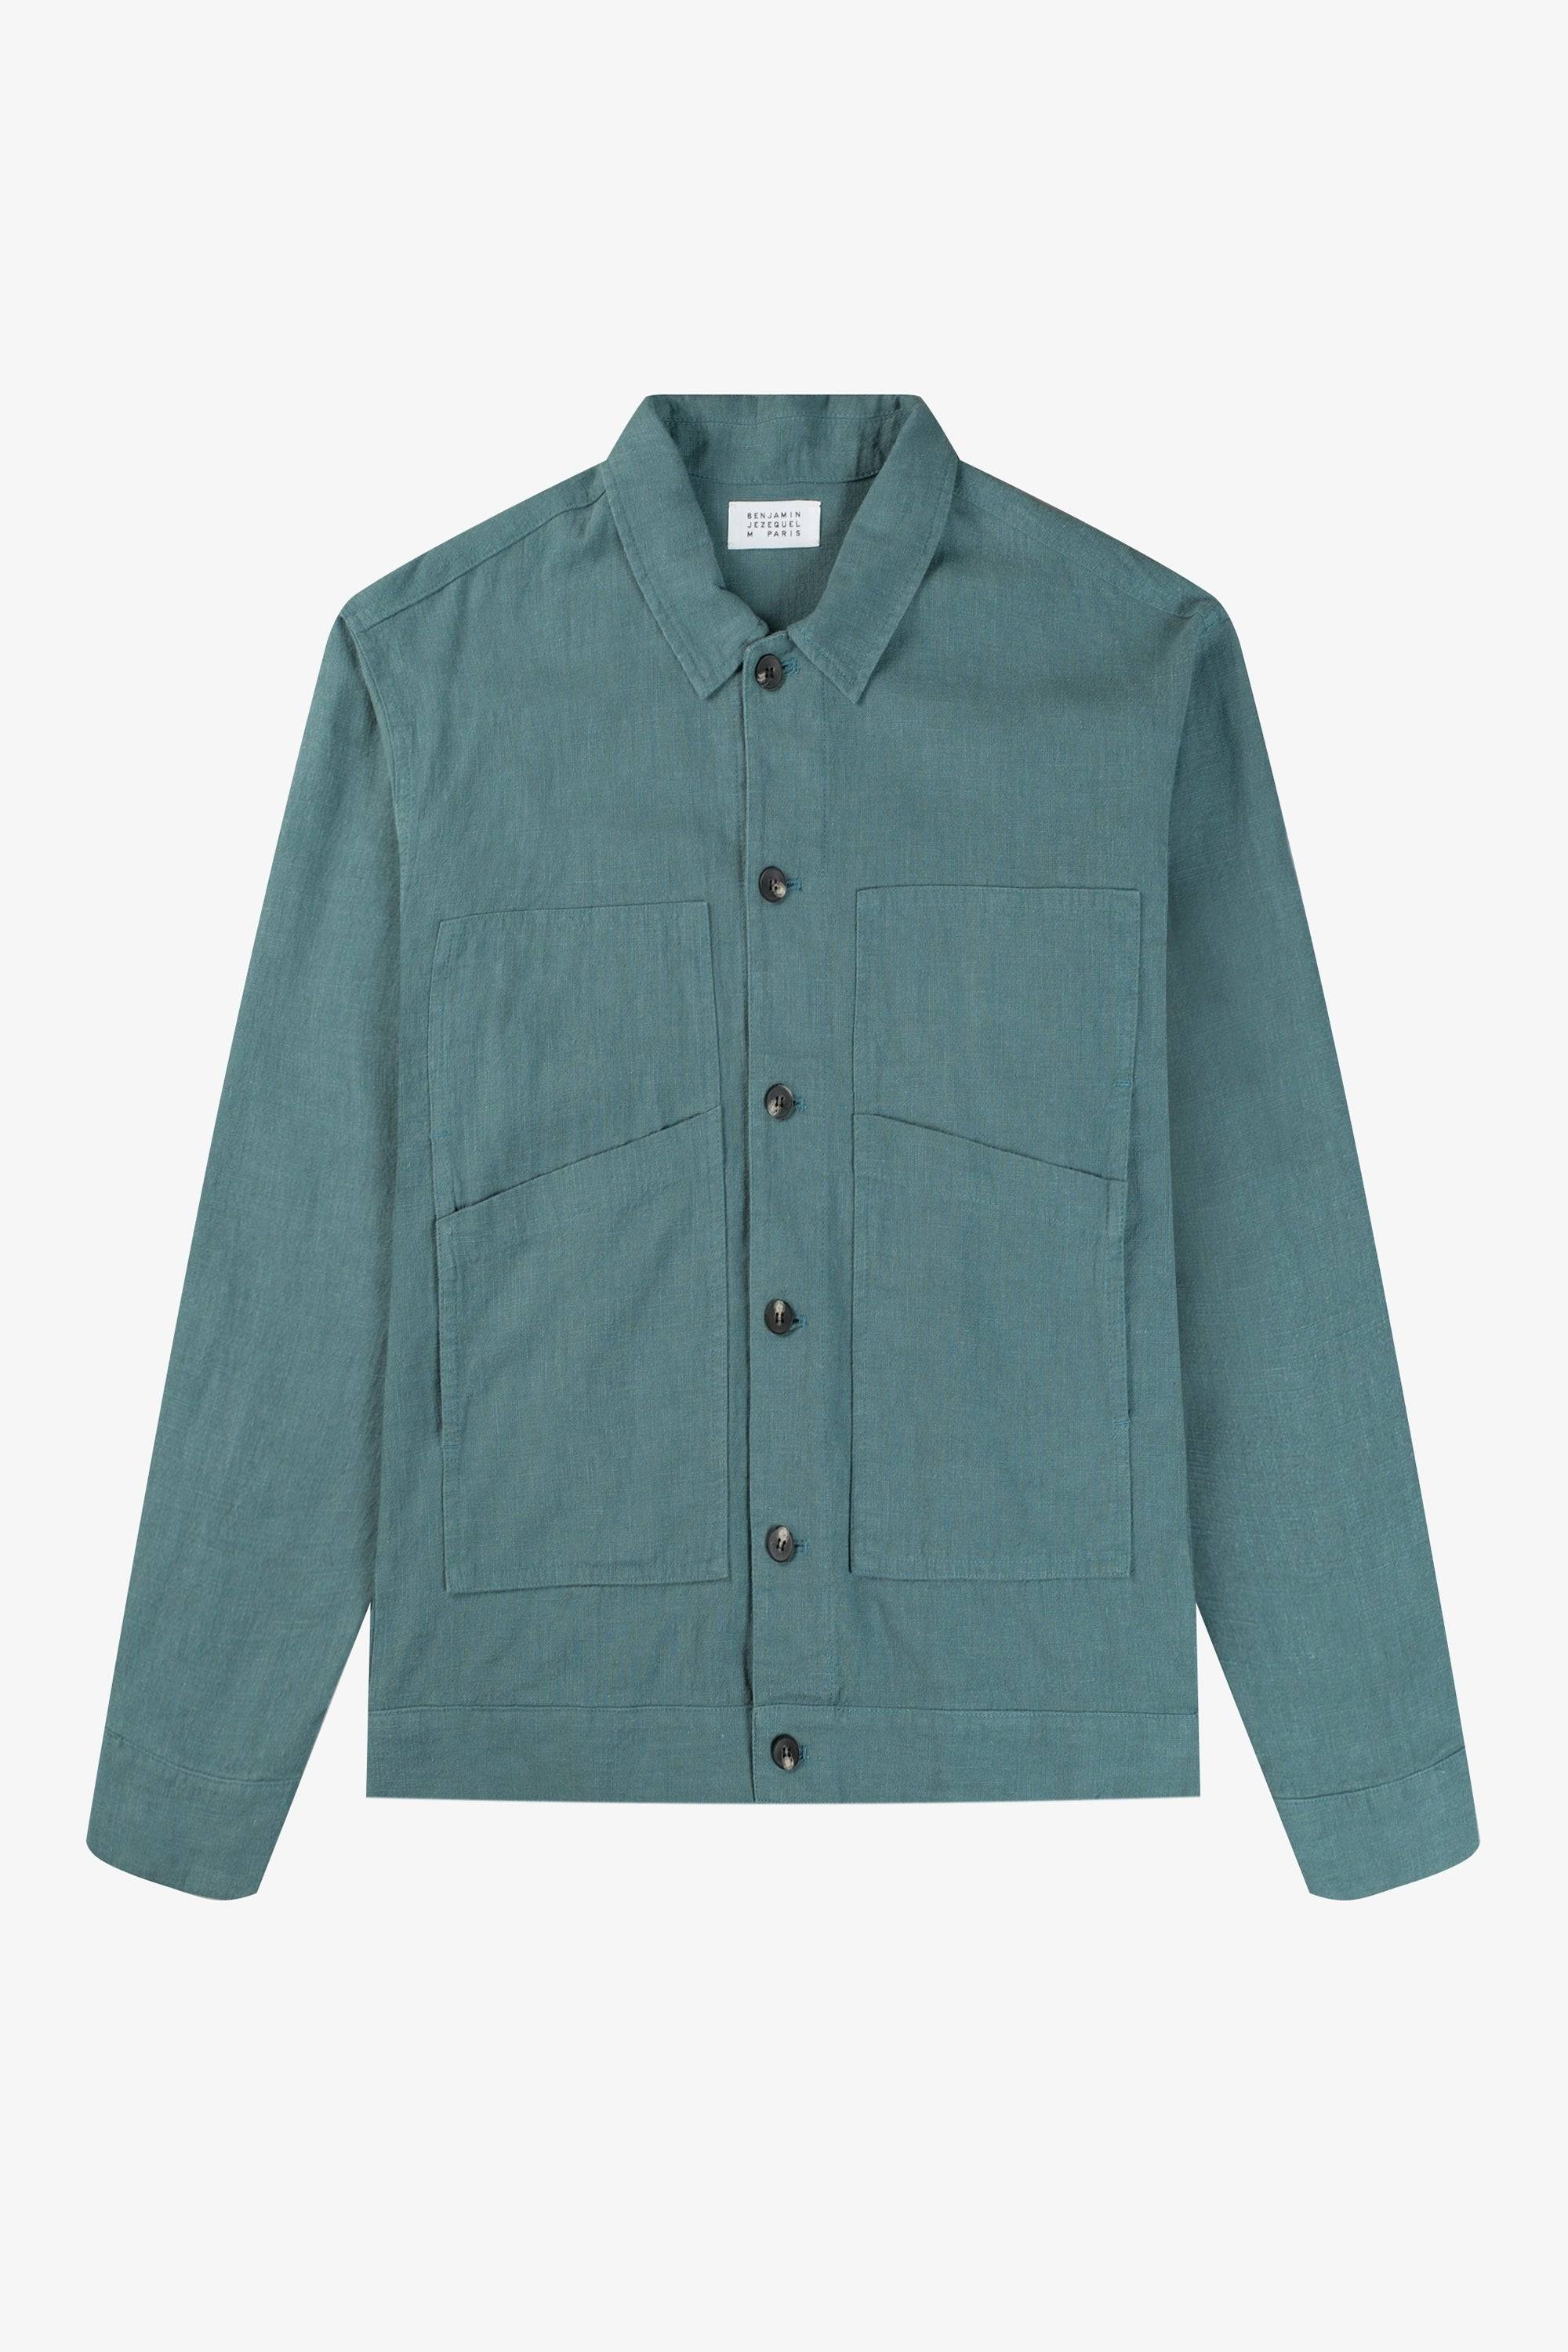 a green shirt with buttons on the chest